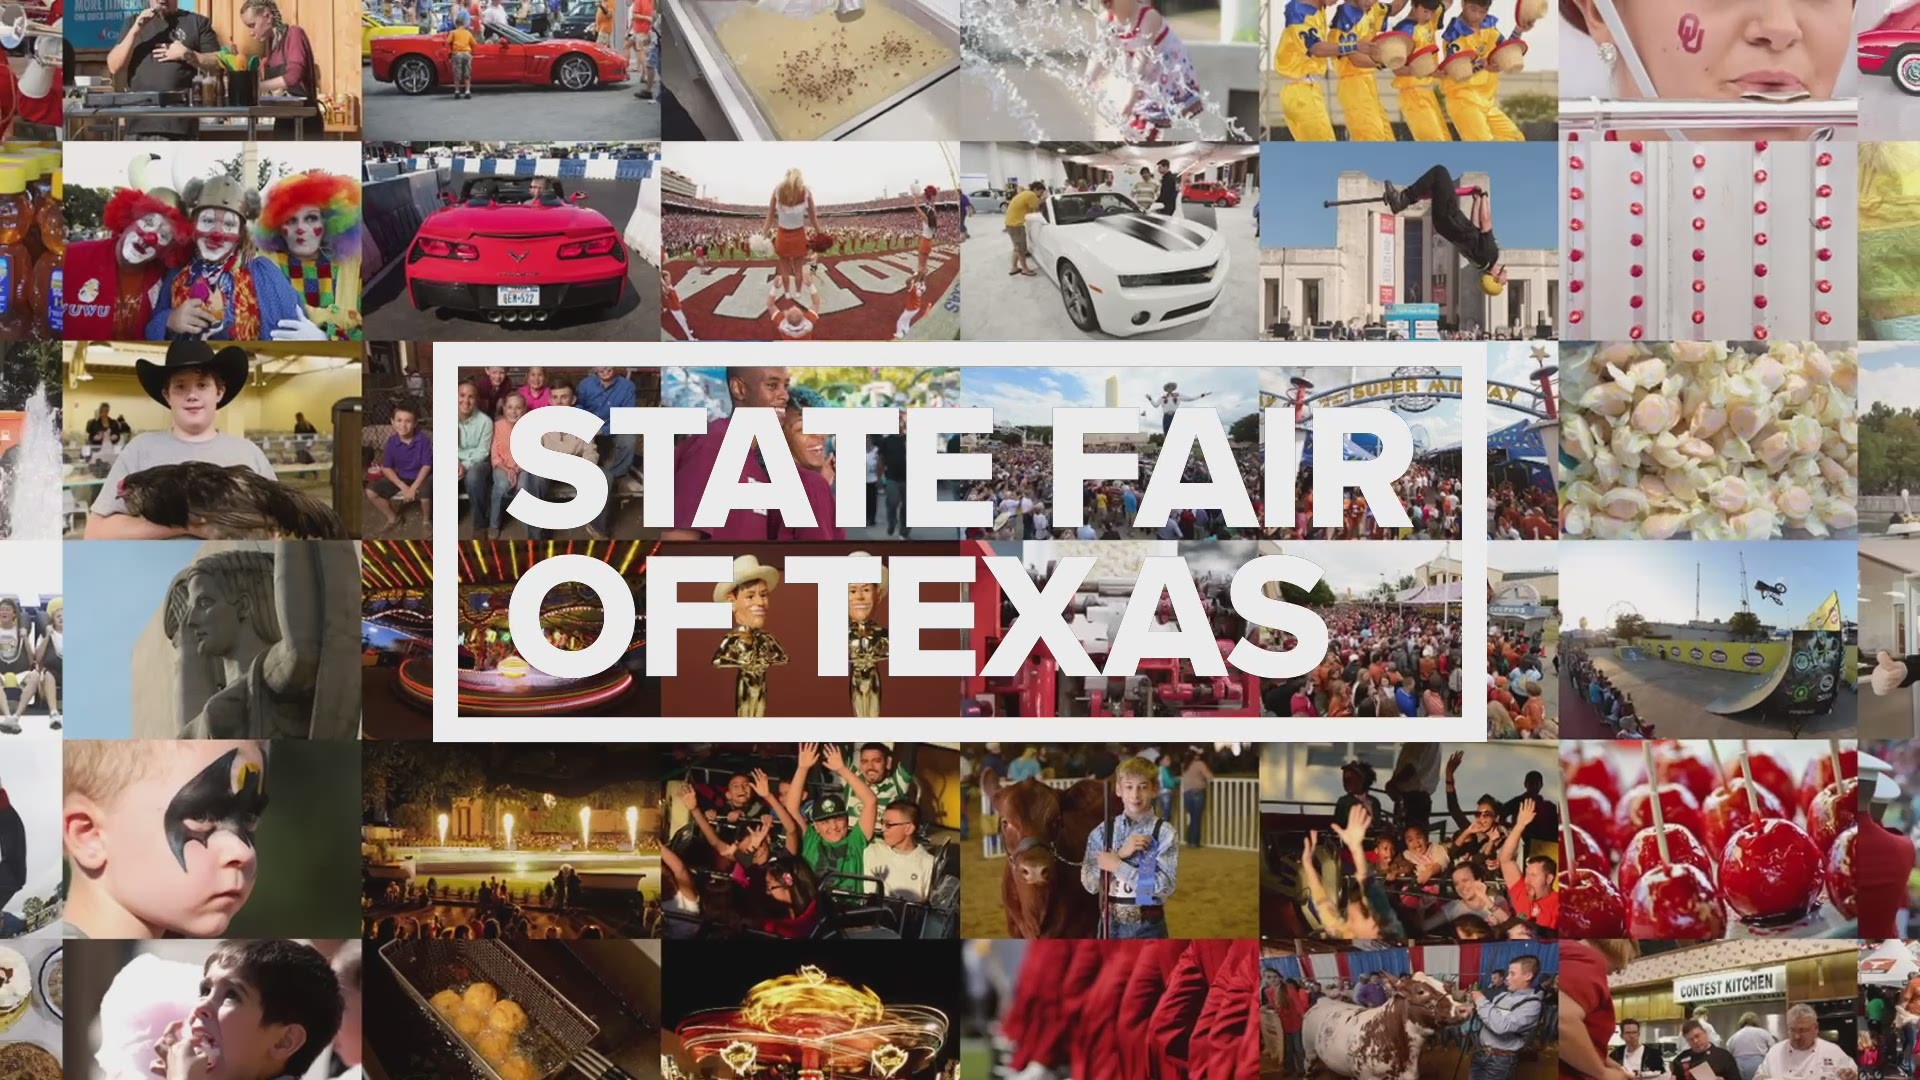 Photographer Kevin Brown has captured 16 years of beautiful memories from the State Fair of Texas. In 2019 his photos will be on display for fairgoers enjoy.